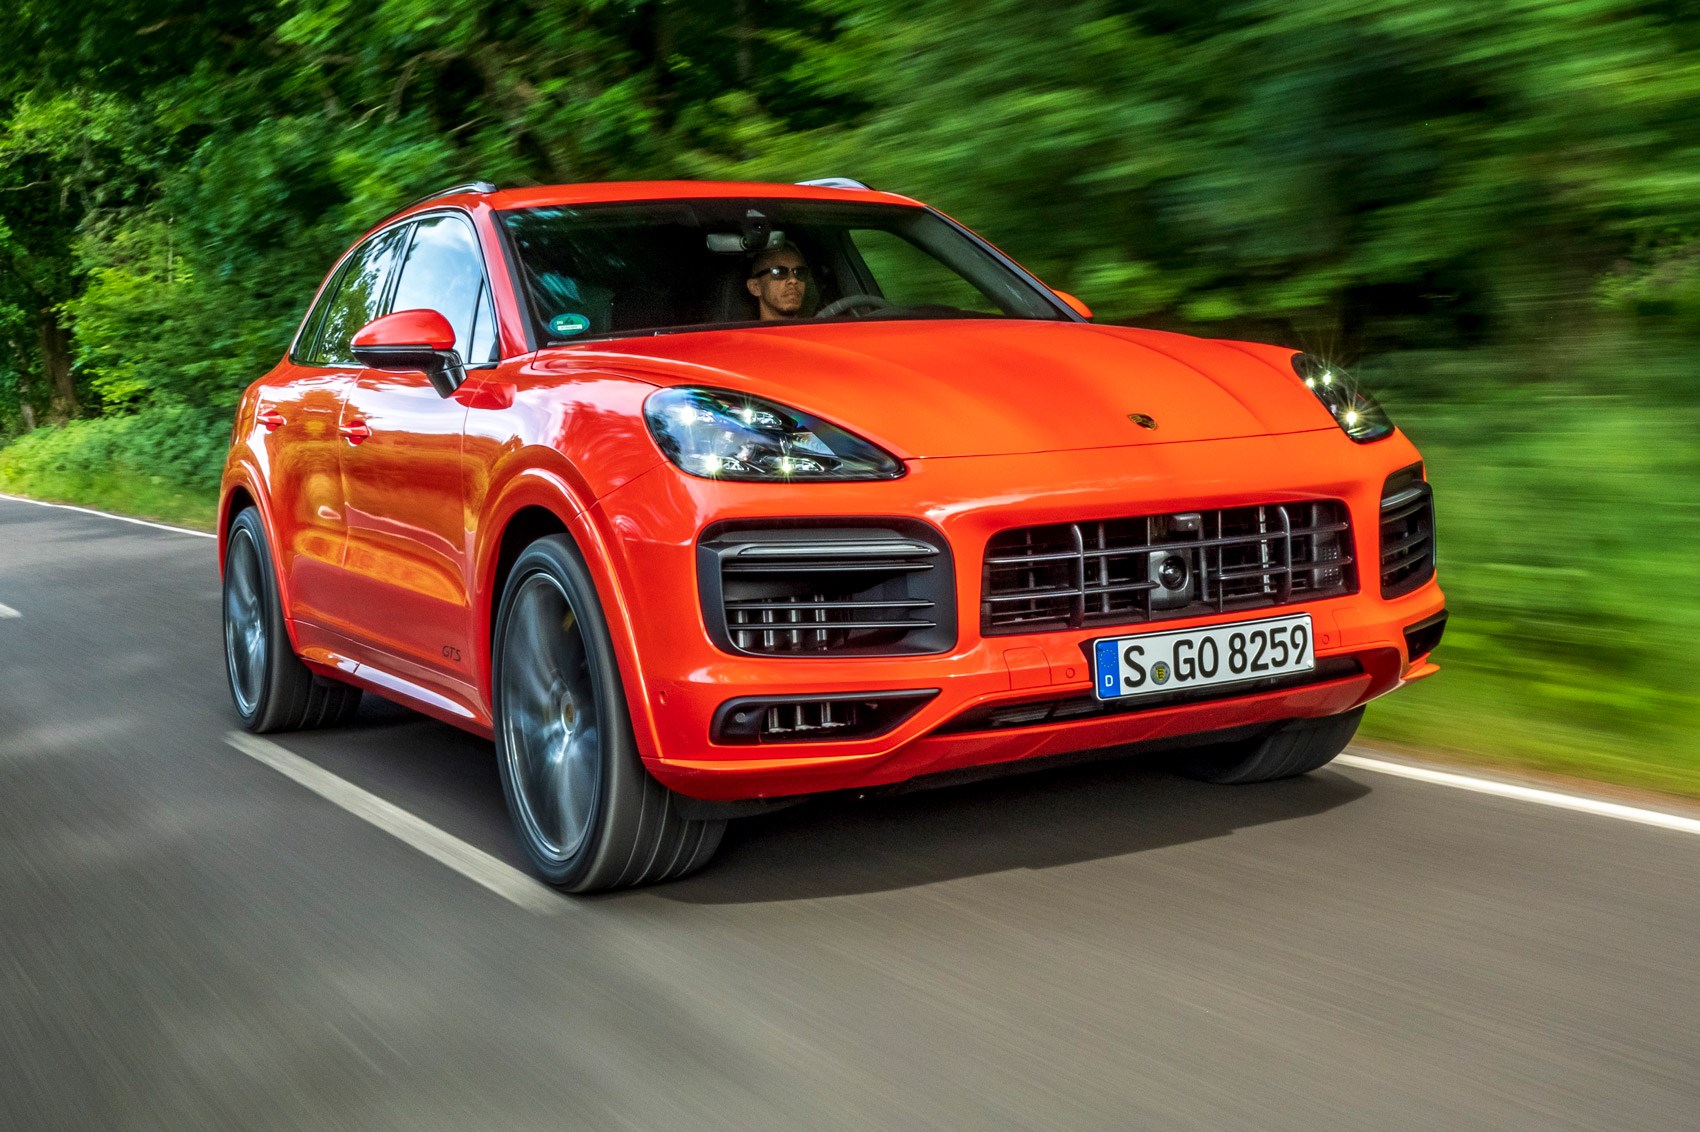 Variant privaat Imperialisme Porsche Cayenne GTS (2020) review: adding a little spice | CAR Magazine